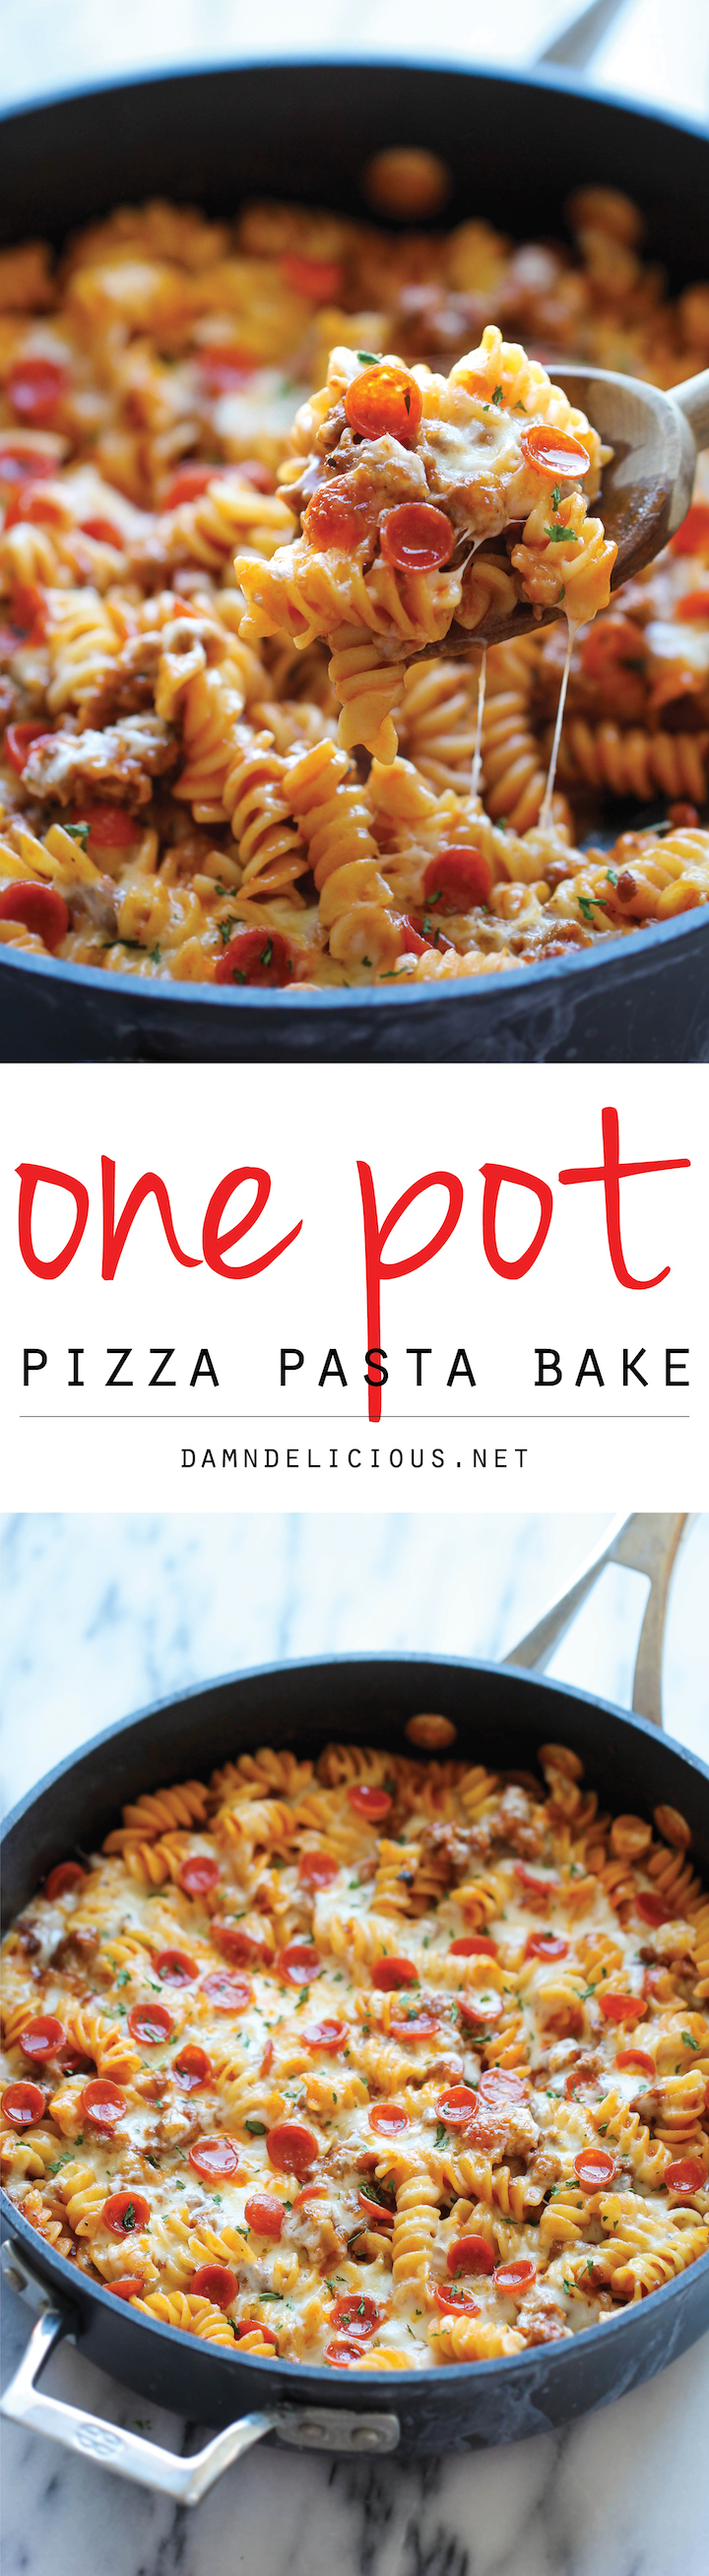 One Pot Pizza Pasta Bake - An easy crowd-pleasing one pot meal that the whole family will love! Everyone will be begging for seconds!